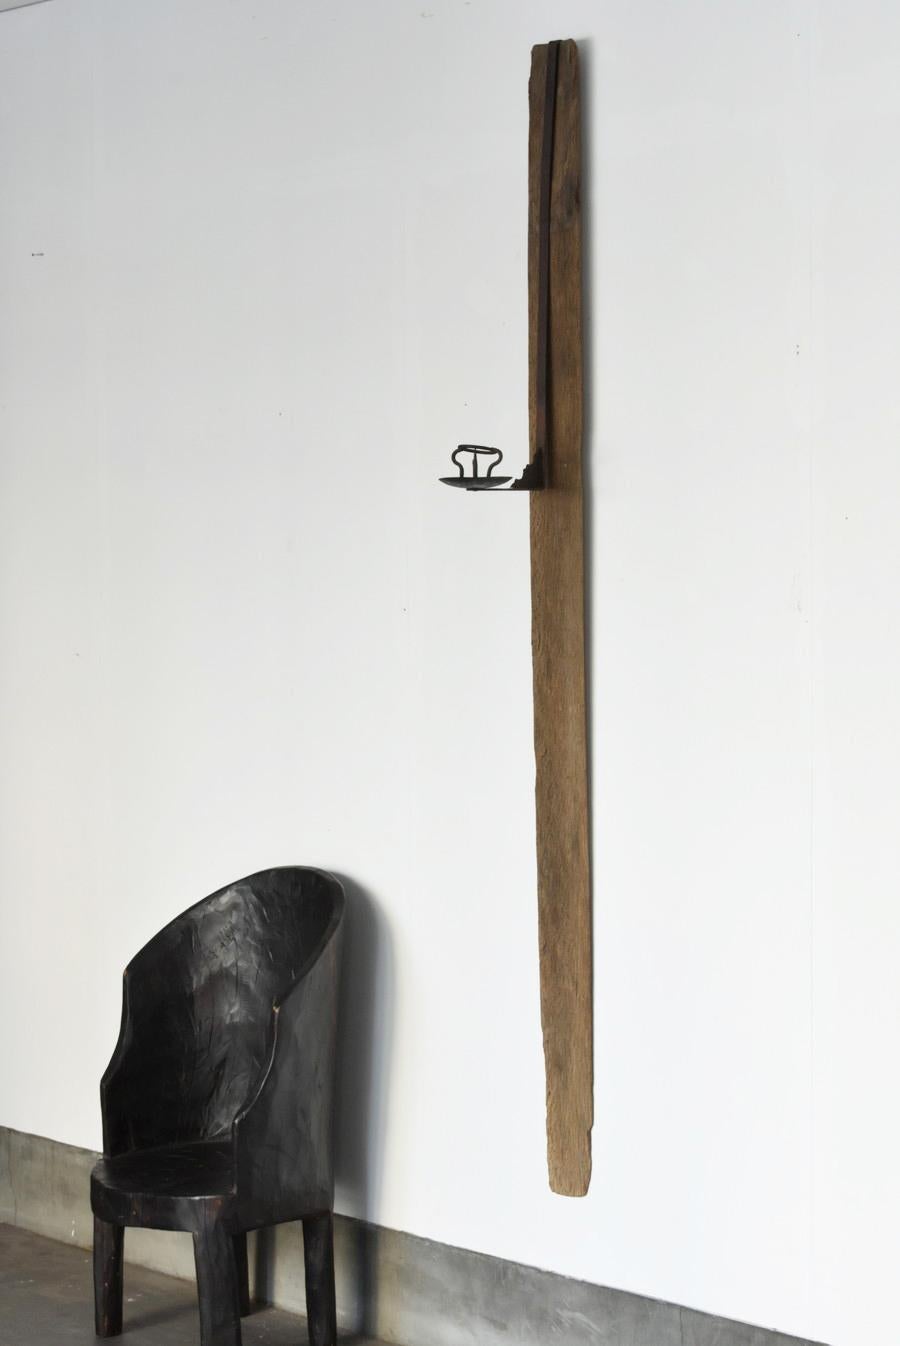 This is an old Japanese wall-mounted candlestick.
It is a special item that combines a wooden board and an iron candlestick.
It is from around the Meiji to early Showa period (1868 to 1920).
The wood used is oak.
It is thought that this iron